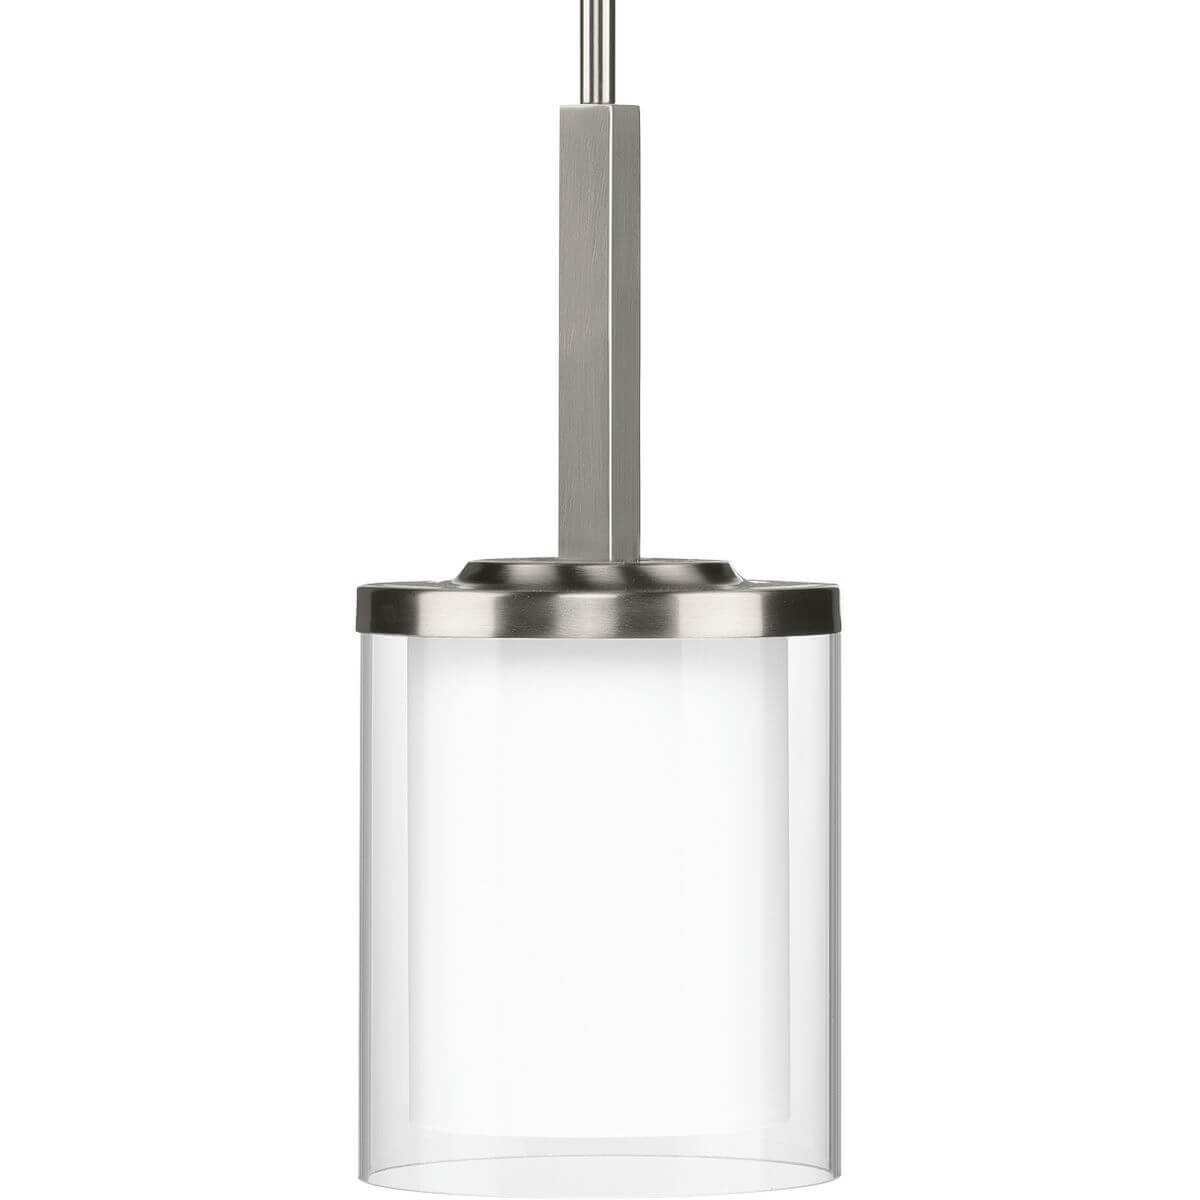 Progress Lighting P500192-009 Mast 1 Light 6 inch Mini Pendant in Brushed Nickel with Clear Glass